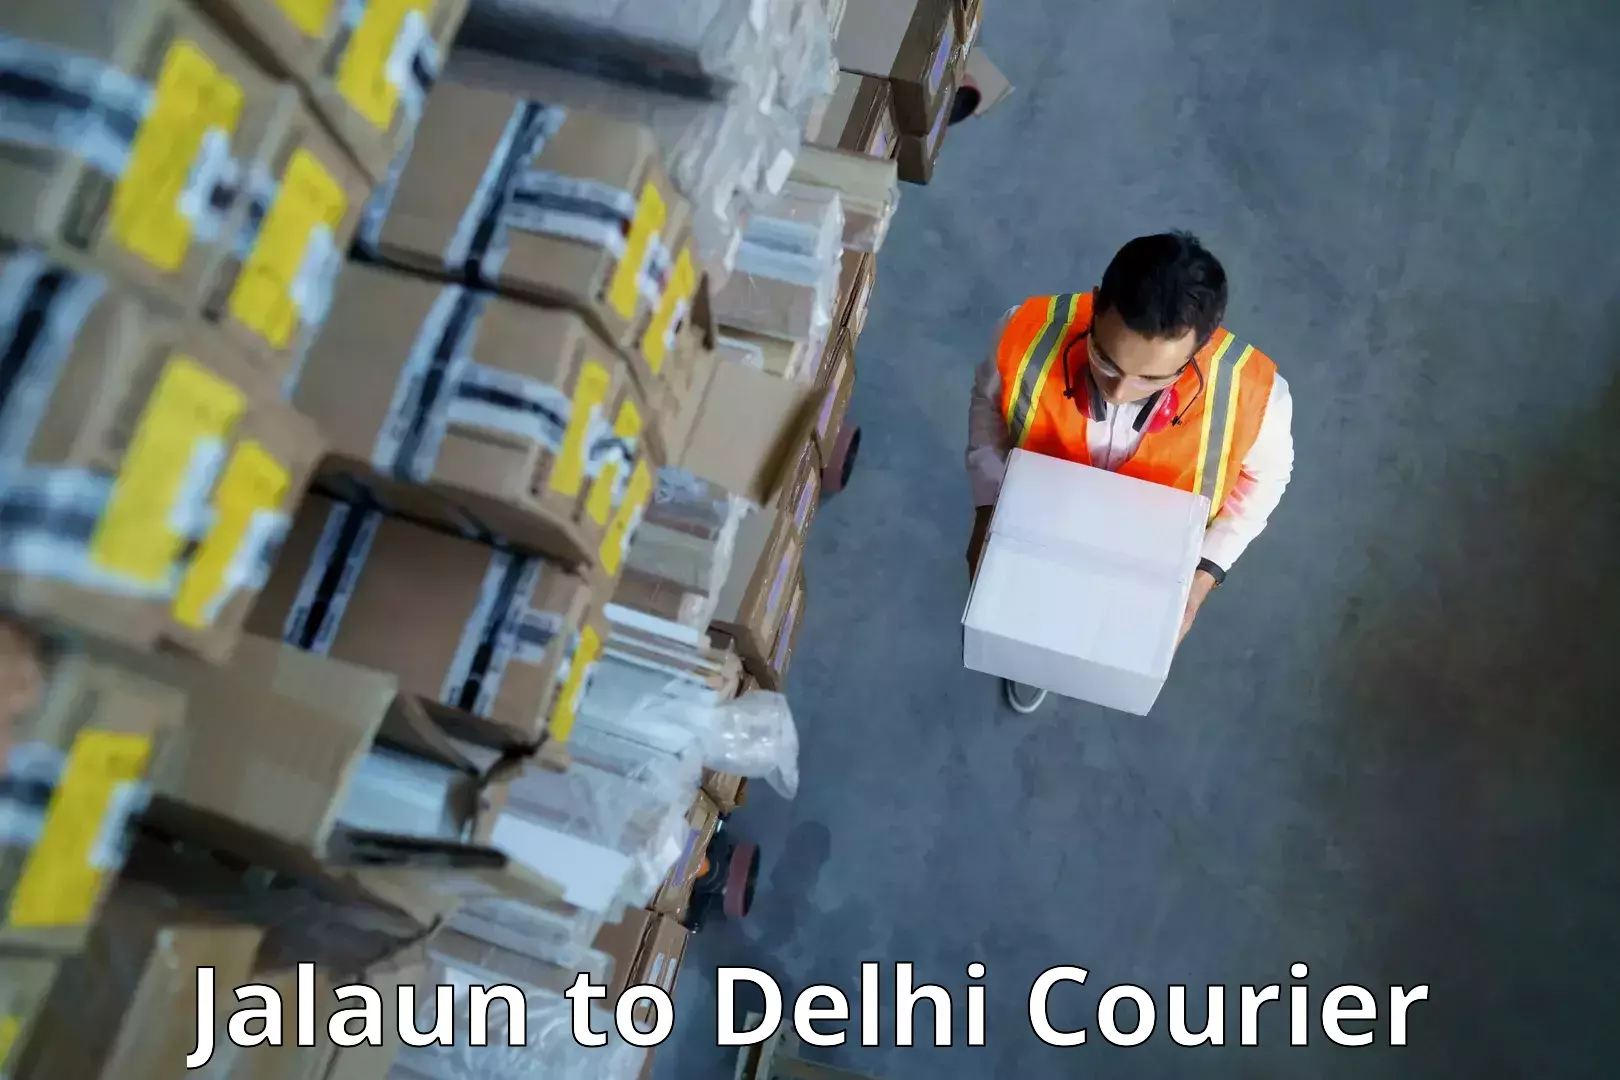 High-speed delivery Jalaun to IIT Delhi